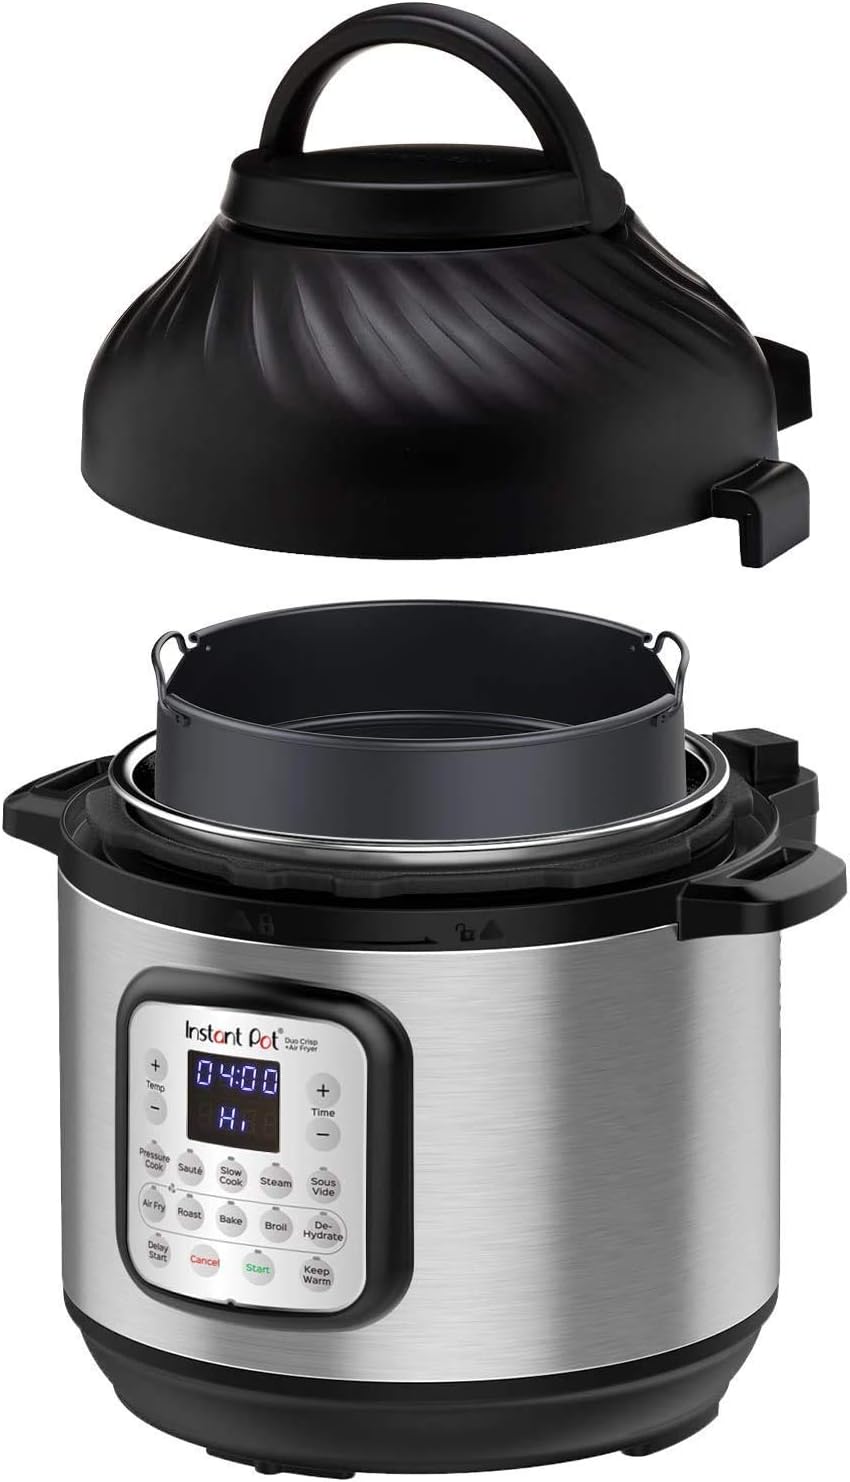 https://bigbigmart.com/wp-content/uploads/2023/07/Instant-Pot-Duo-Crisp-11-in-1-Air-Fryer-and-Electric-Pressure-Cooker-Combo-with-Multicooker-Lids-that-Air-Fries-Steams-Slow-Cooks-Sautes-Dehydrates-and-More-Free-App-With-1900-Recipes-6-Quart.jpg